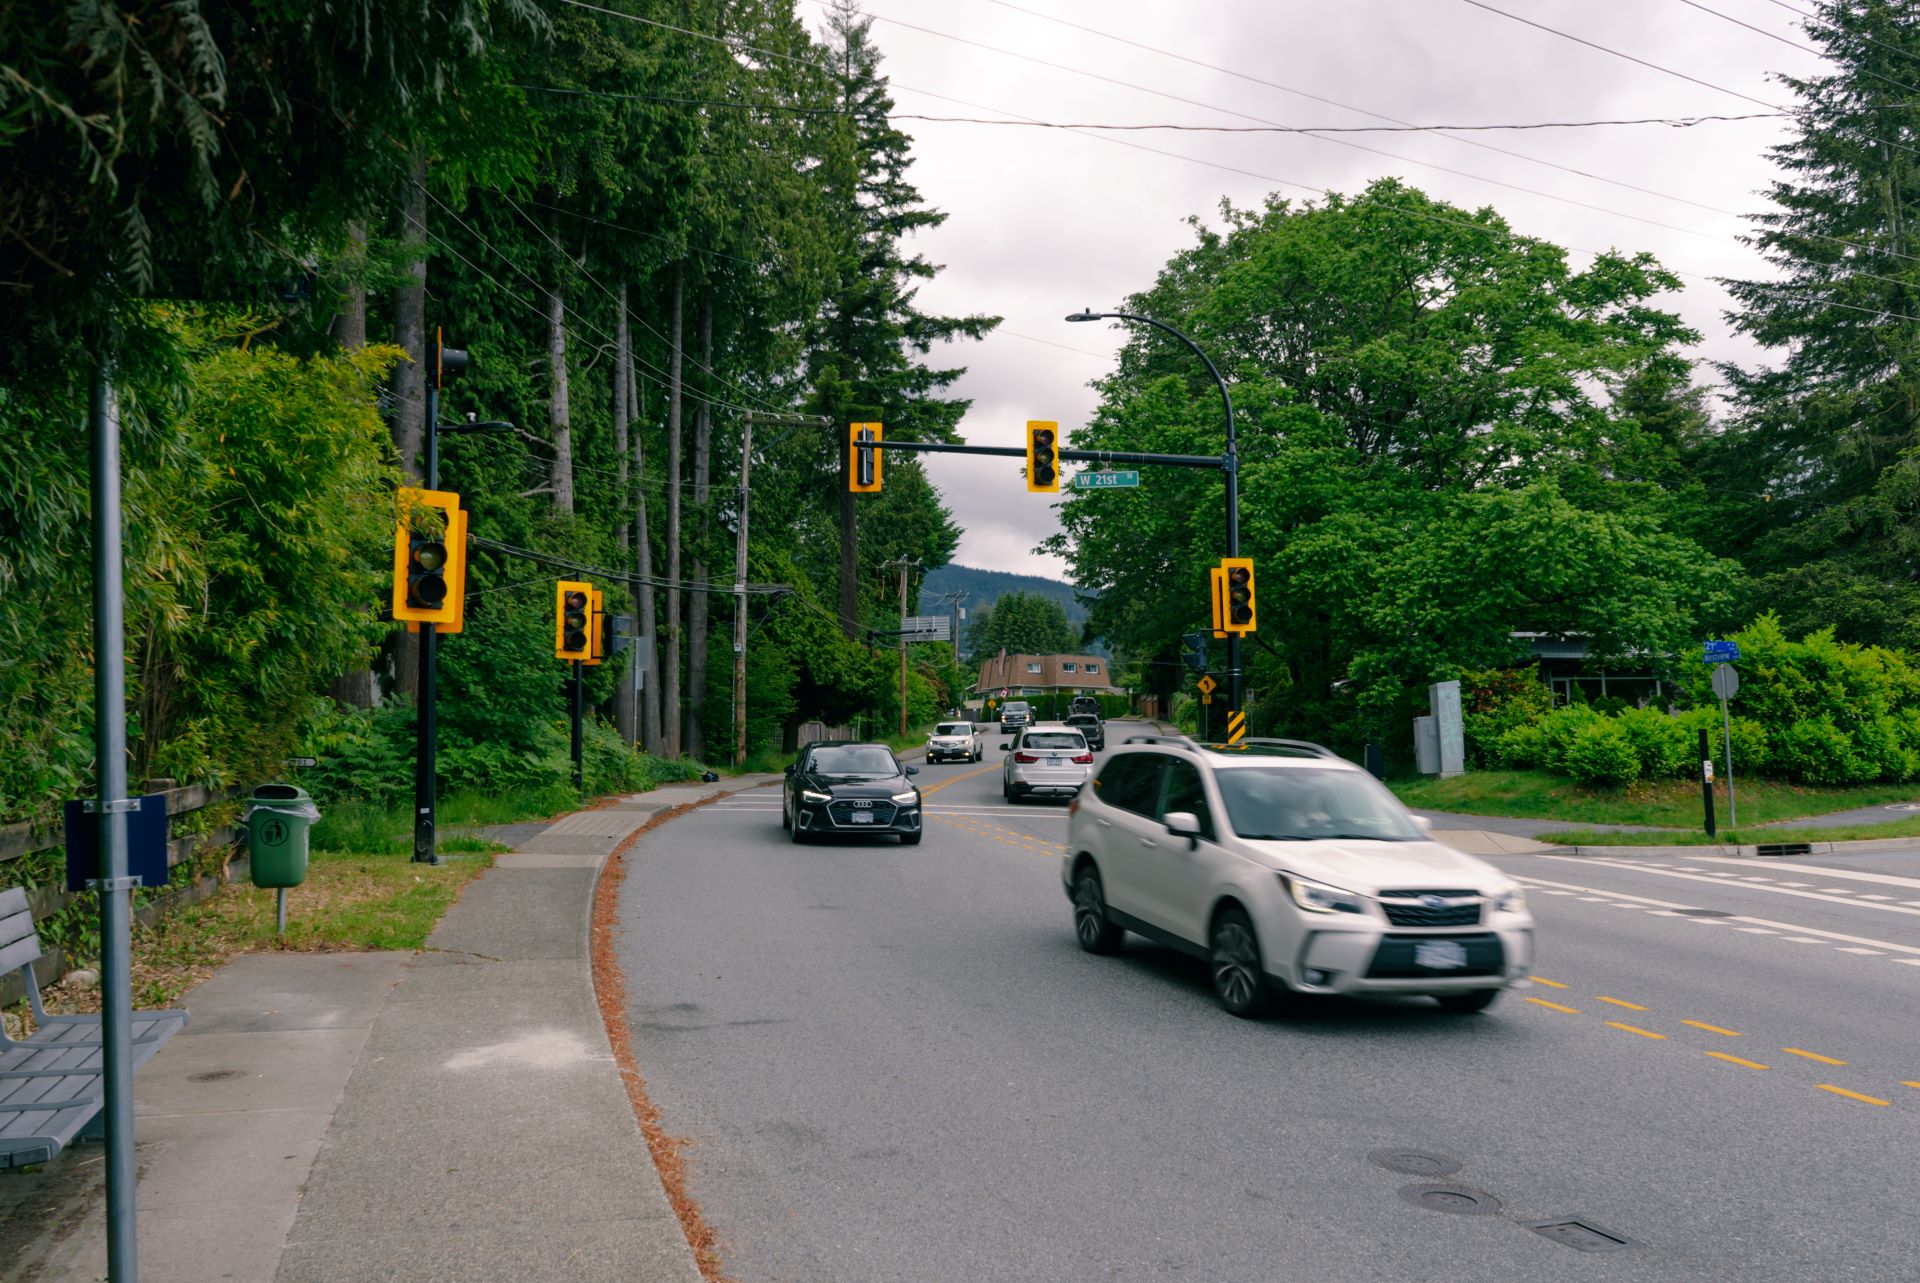 The intersection at Westview Drive and West 21st Street in North Vancouver